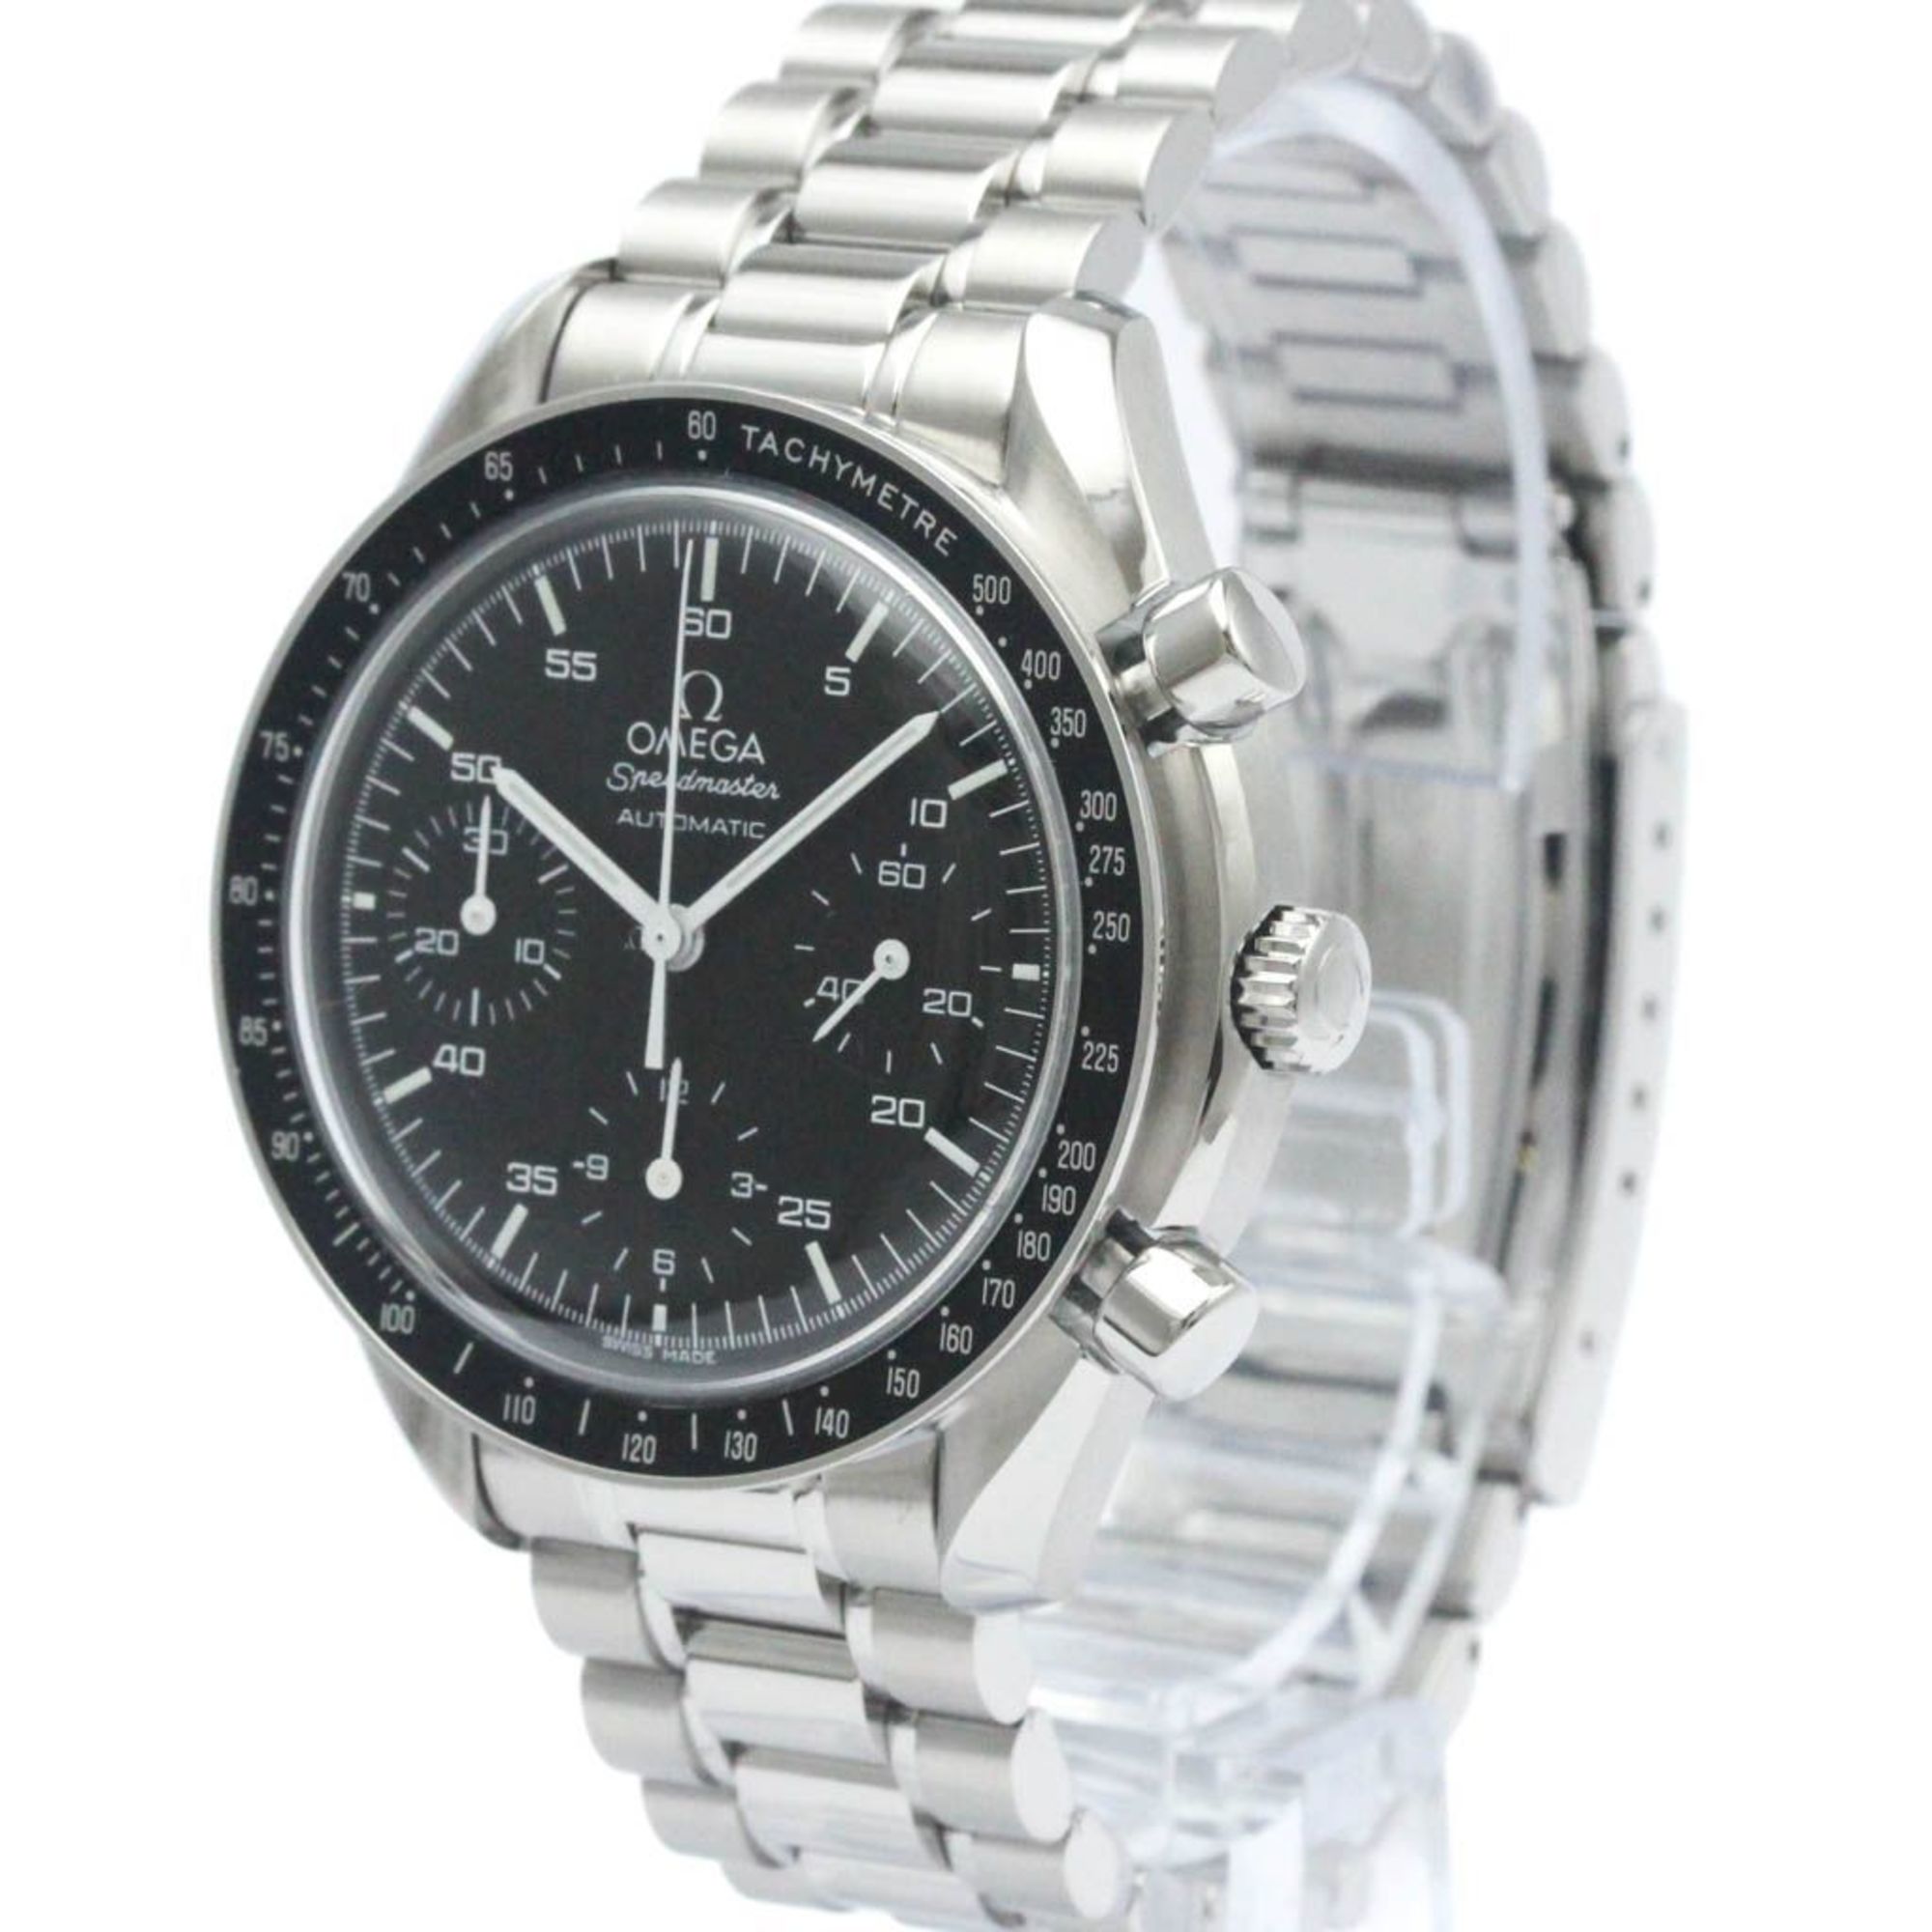 Polished OMEGA Speedmaster Automatic Steel Mens Watch 3510.50 BF567934